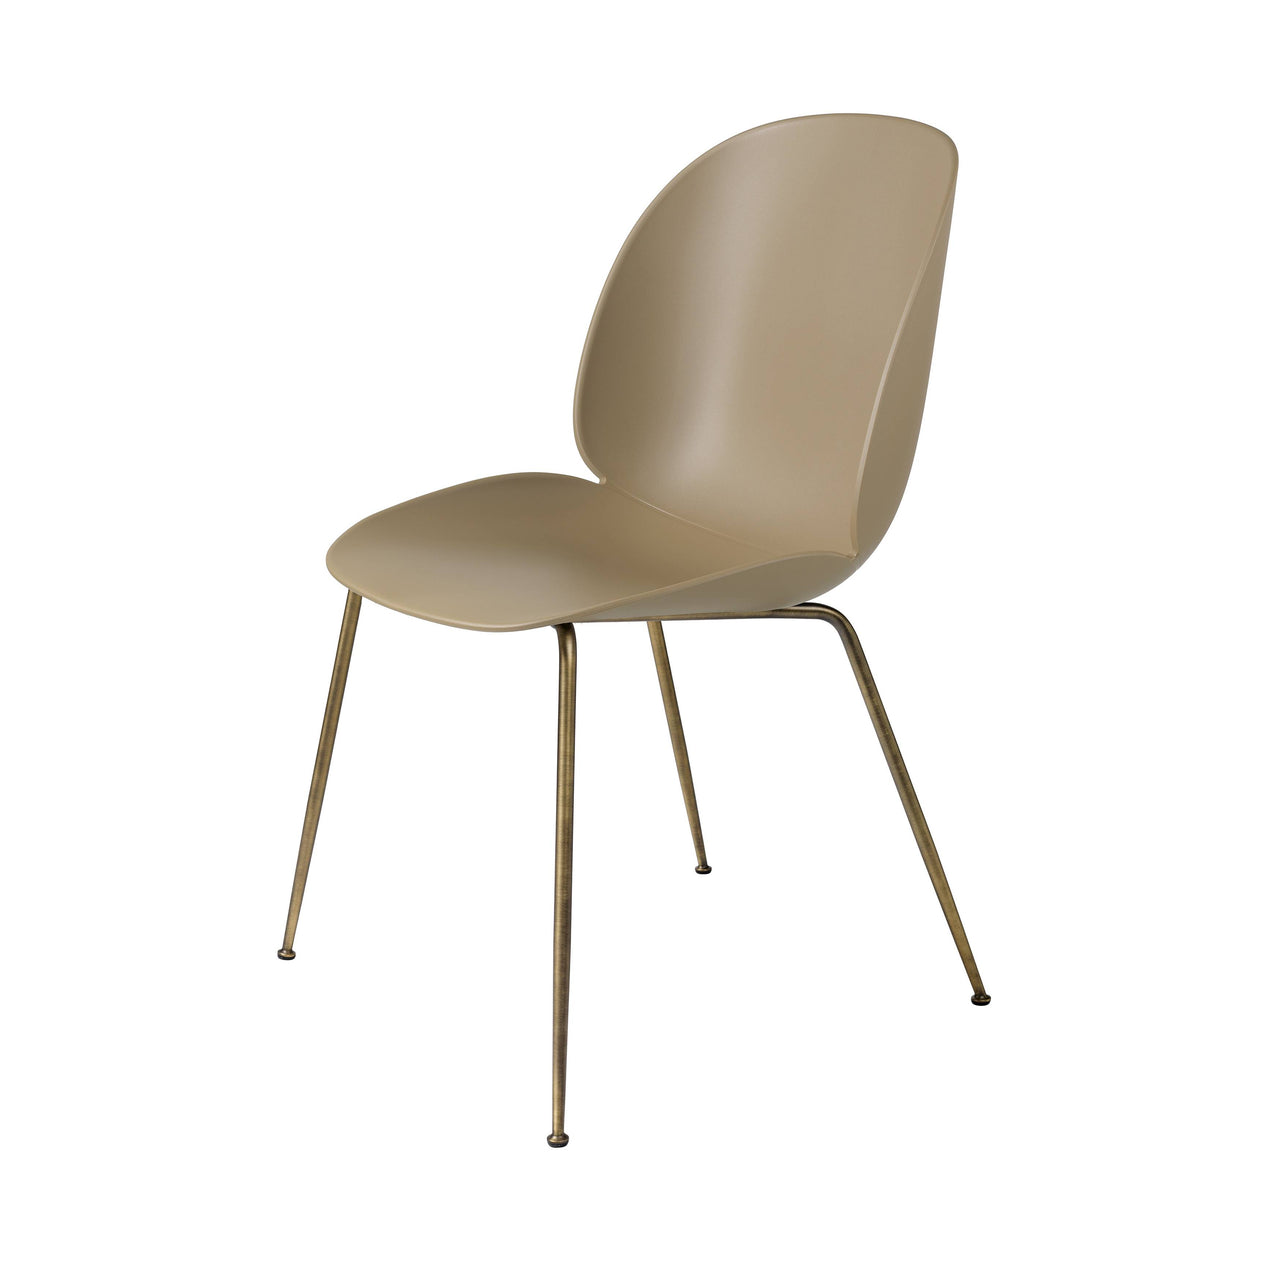 Beetle Dining Chair: Conic Base + Pebble  Brown + Antique Brass + Felt Glides